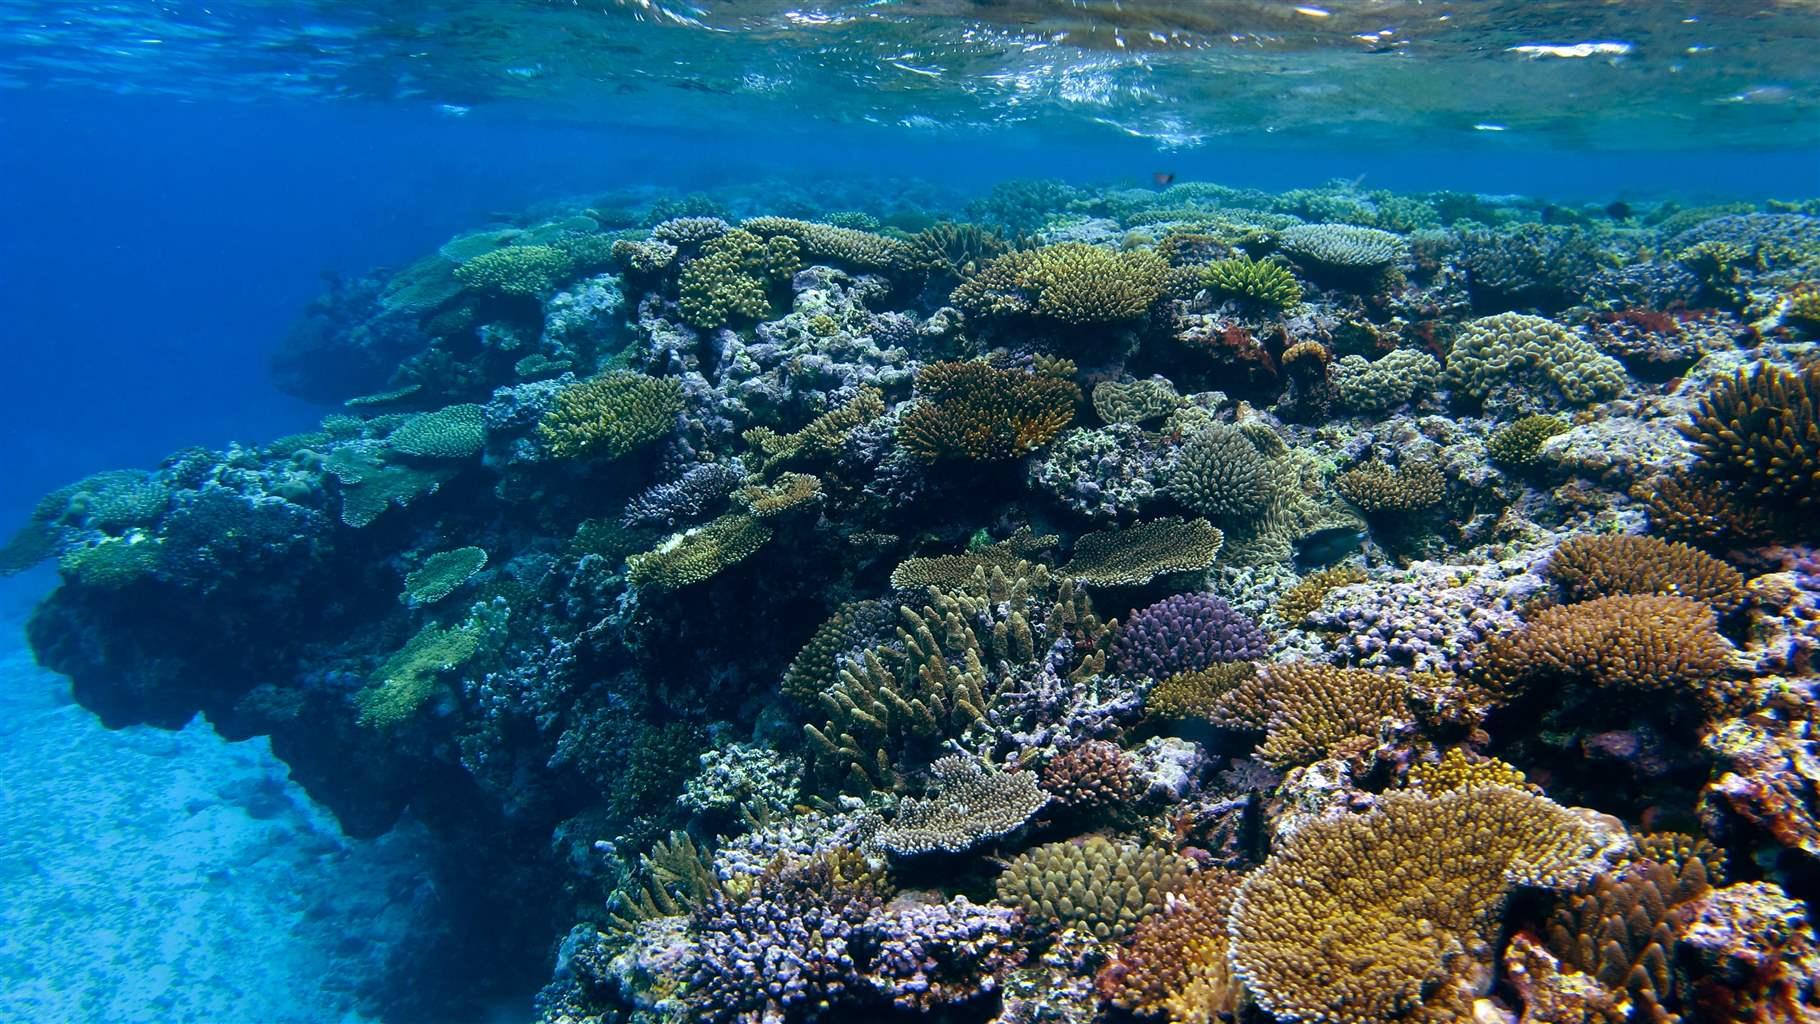 Coral reefs and organisms in New Caledonia underwater